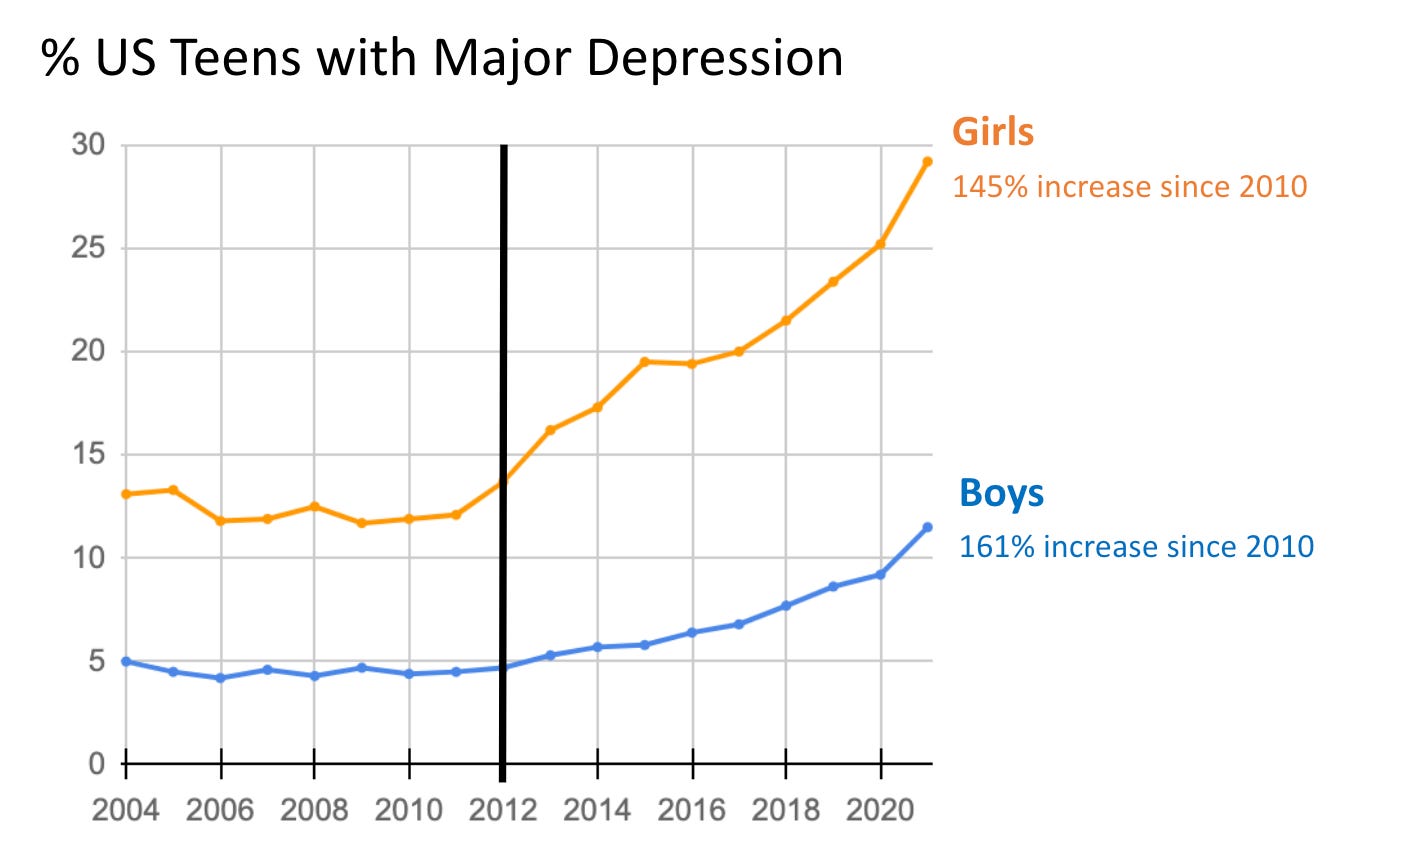 % of US teens (12-17) who had a major depressive episode in the last year